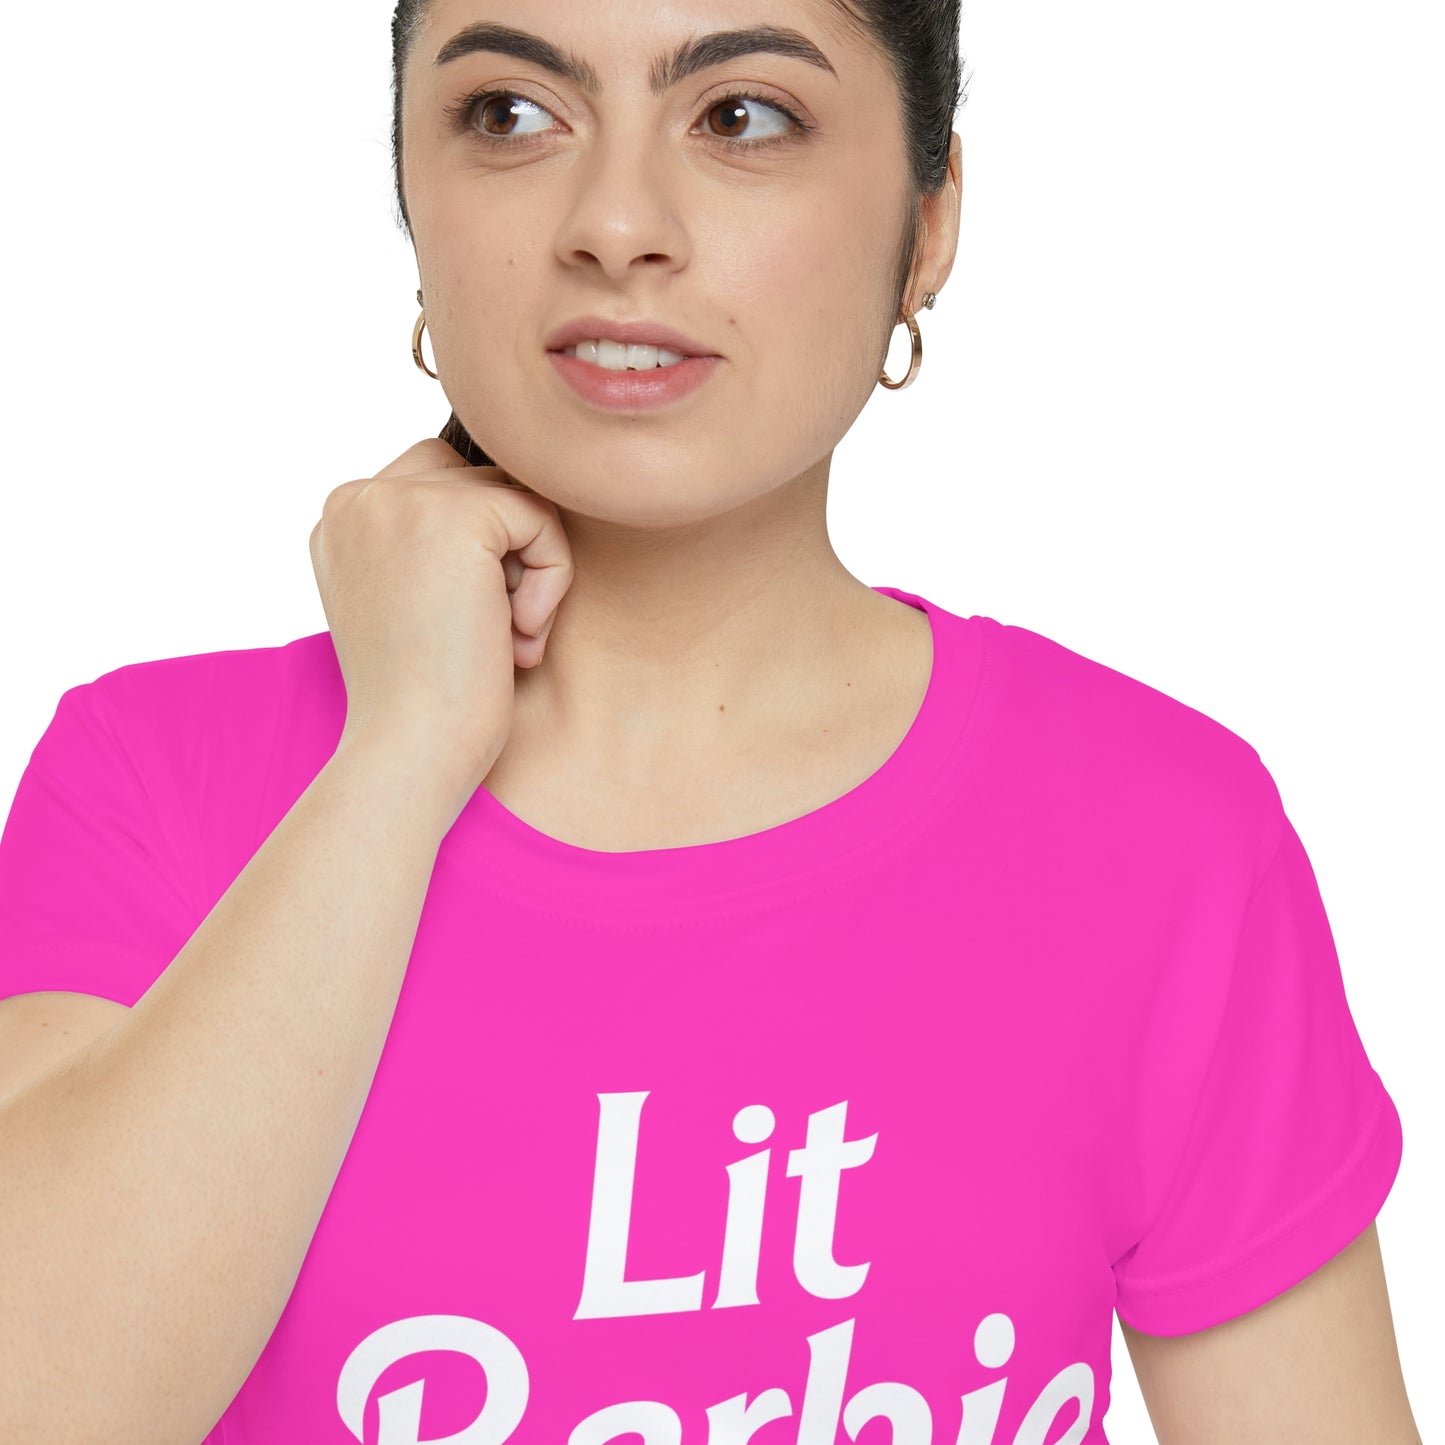 Lit Barbie, Bachelorette Party Shirts, Bridesmaid Gifts, Here comes the Party Tees, Group Party Favor Shirts, Bridal Party Shirt for women